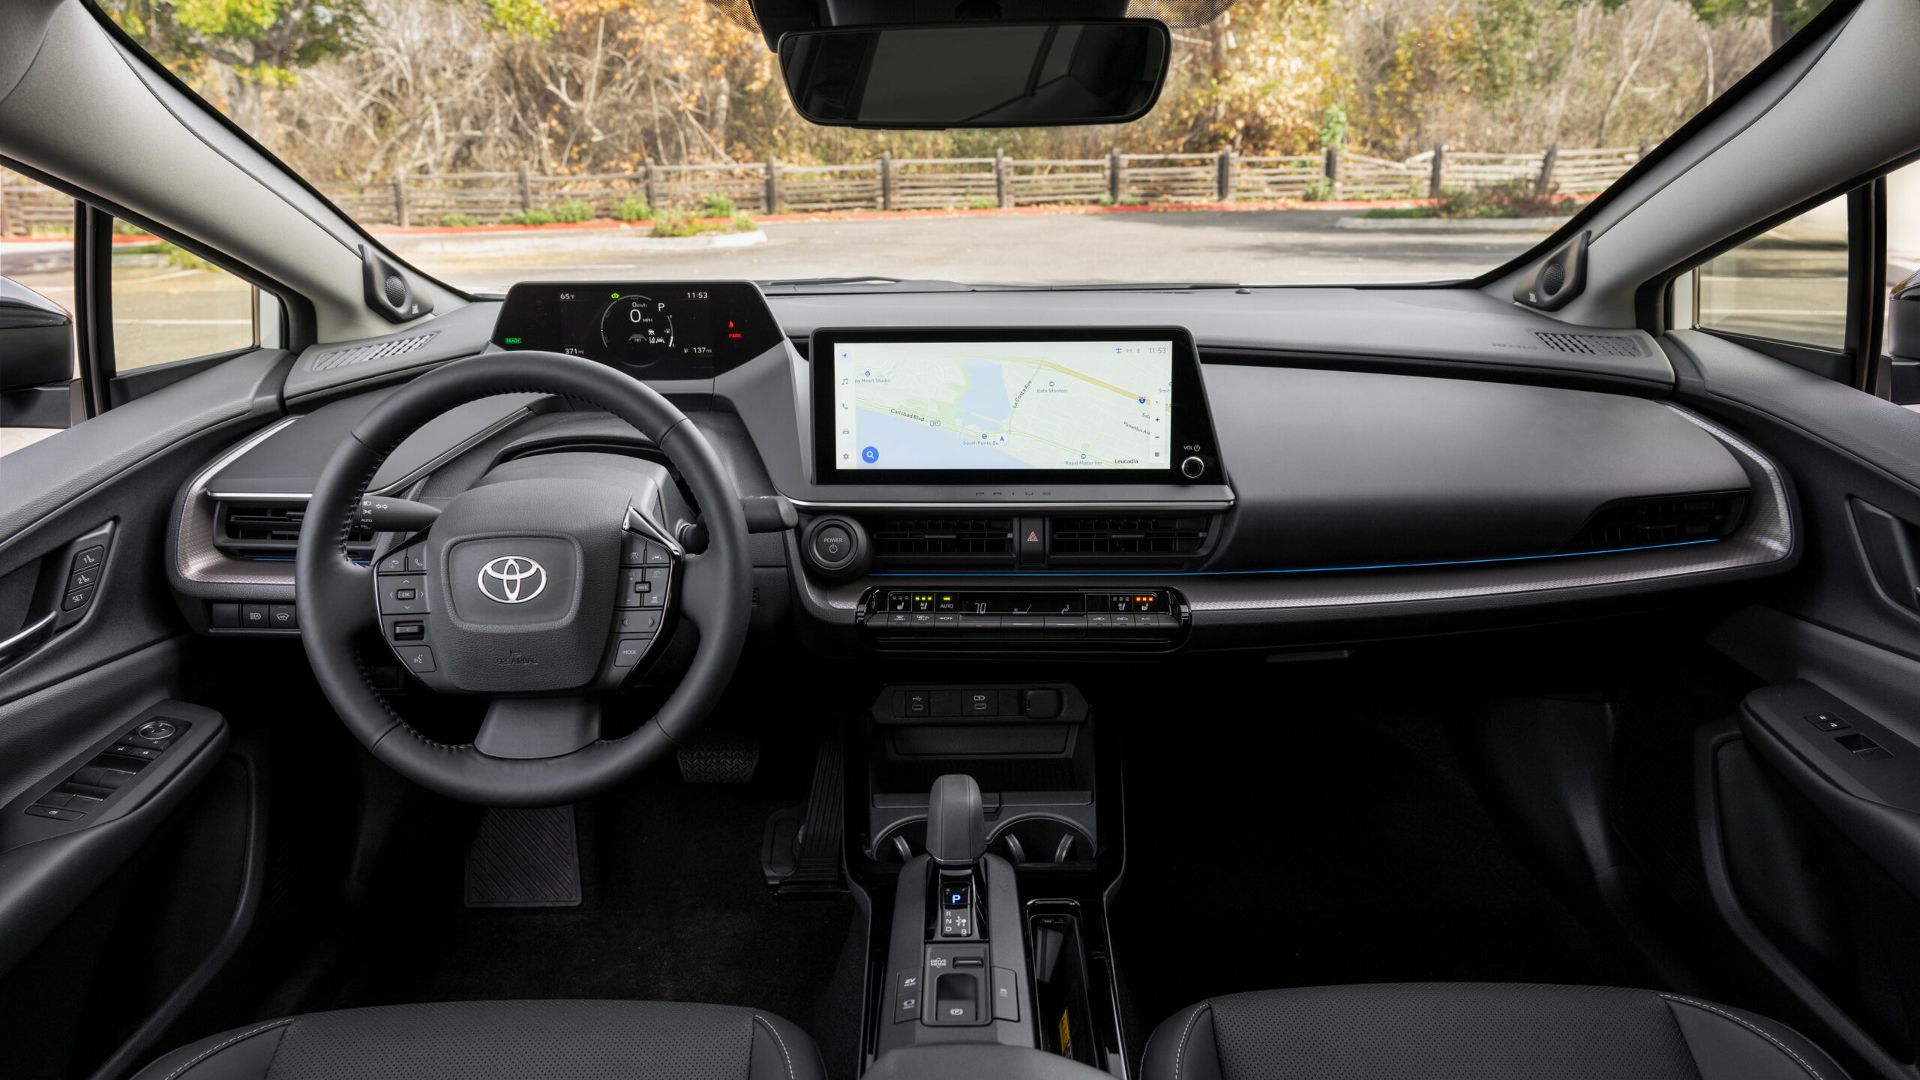 Interior view of a Toyota Prius featuring a large touchscreen display.